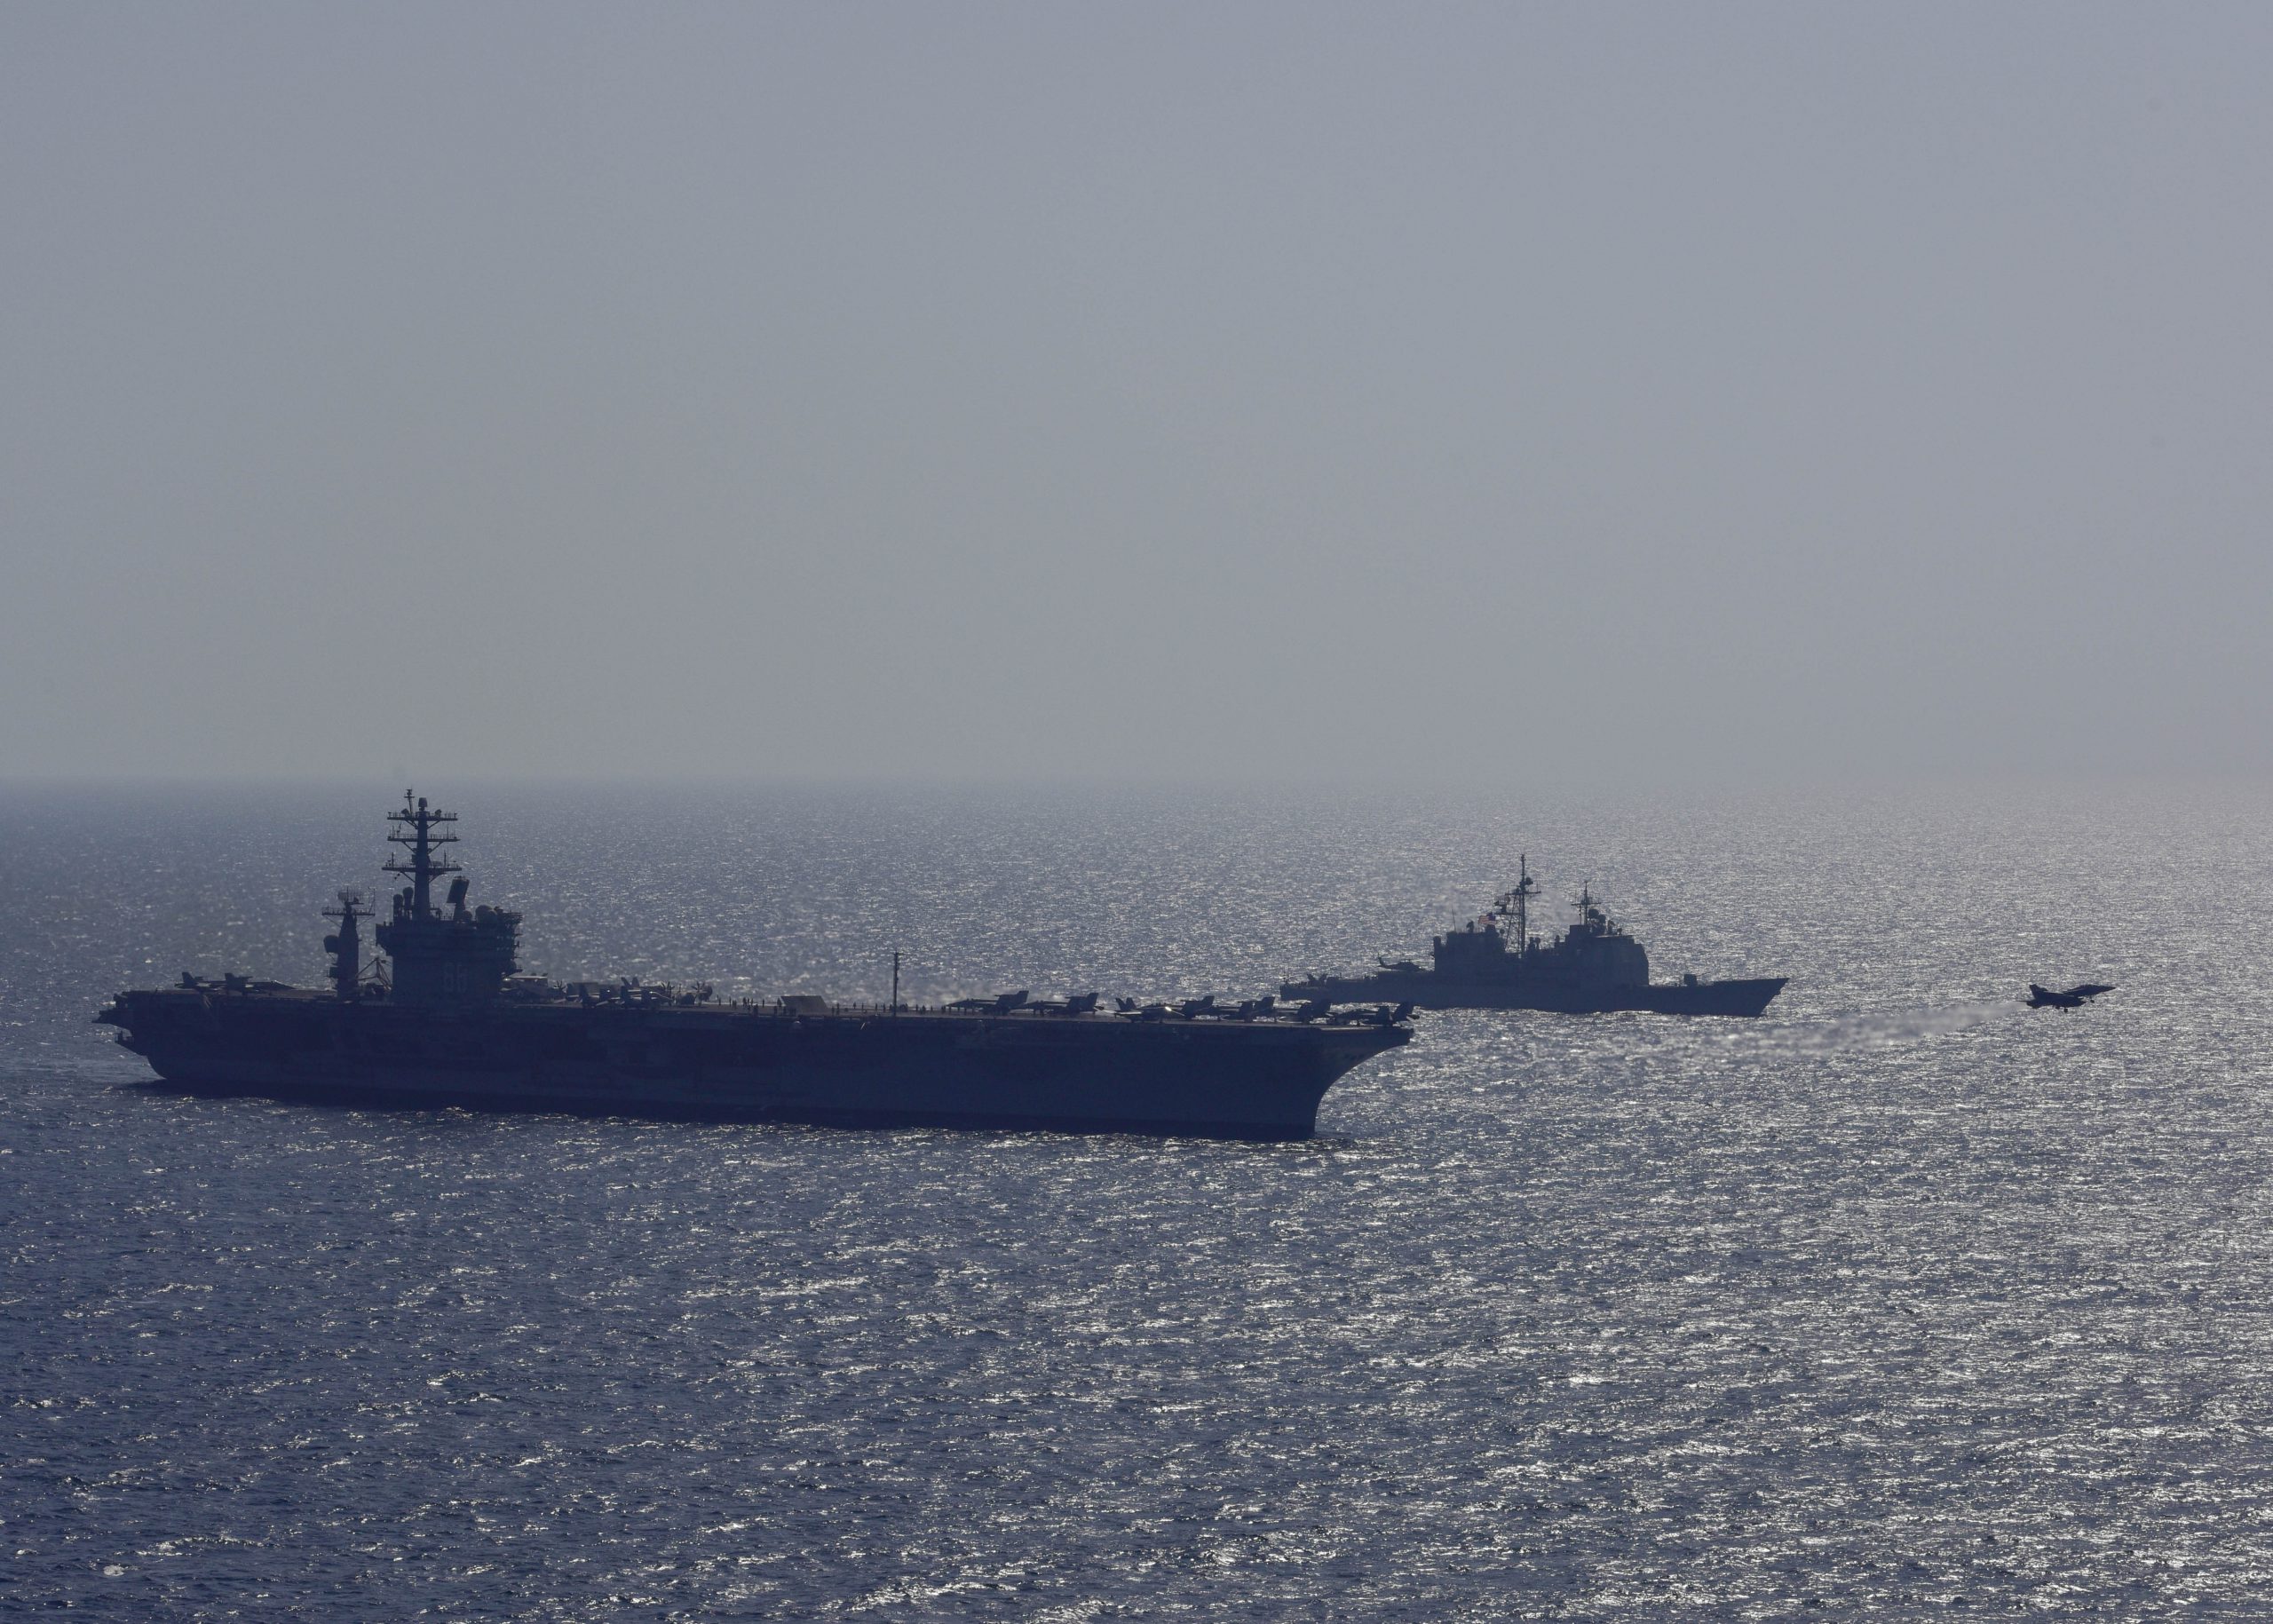 ARABIAN GULF (Oct. 20, 2017) The aircraft carrier USS Nimitz (CVN 68) and the Ticonderoga-class guided-missile cruiser USS Vella Gulf (CG 72) patrol alongside each other, Oct. 20, 2017, in the Arabian Gulf. Nimitz is deployed in the U.S. 5th Fleet area of operations in support of Operation Inherent Resolve. While in this region, the ship and strike group are conducting maritime security operations to reassure allies and partners, preserve freedom of navigation, and maintain the free flow of commerce. U.S. Navy photo by Mass Communication Specialist 2nd Class Austin Haist. -